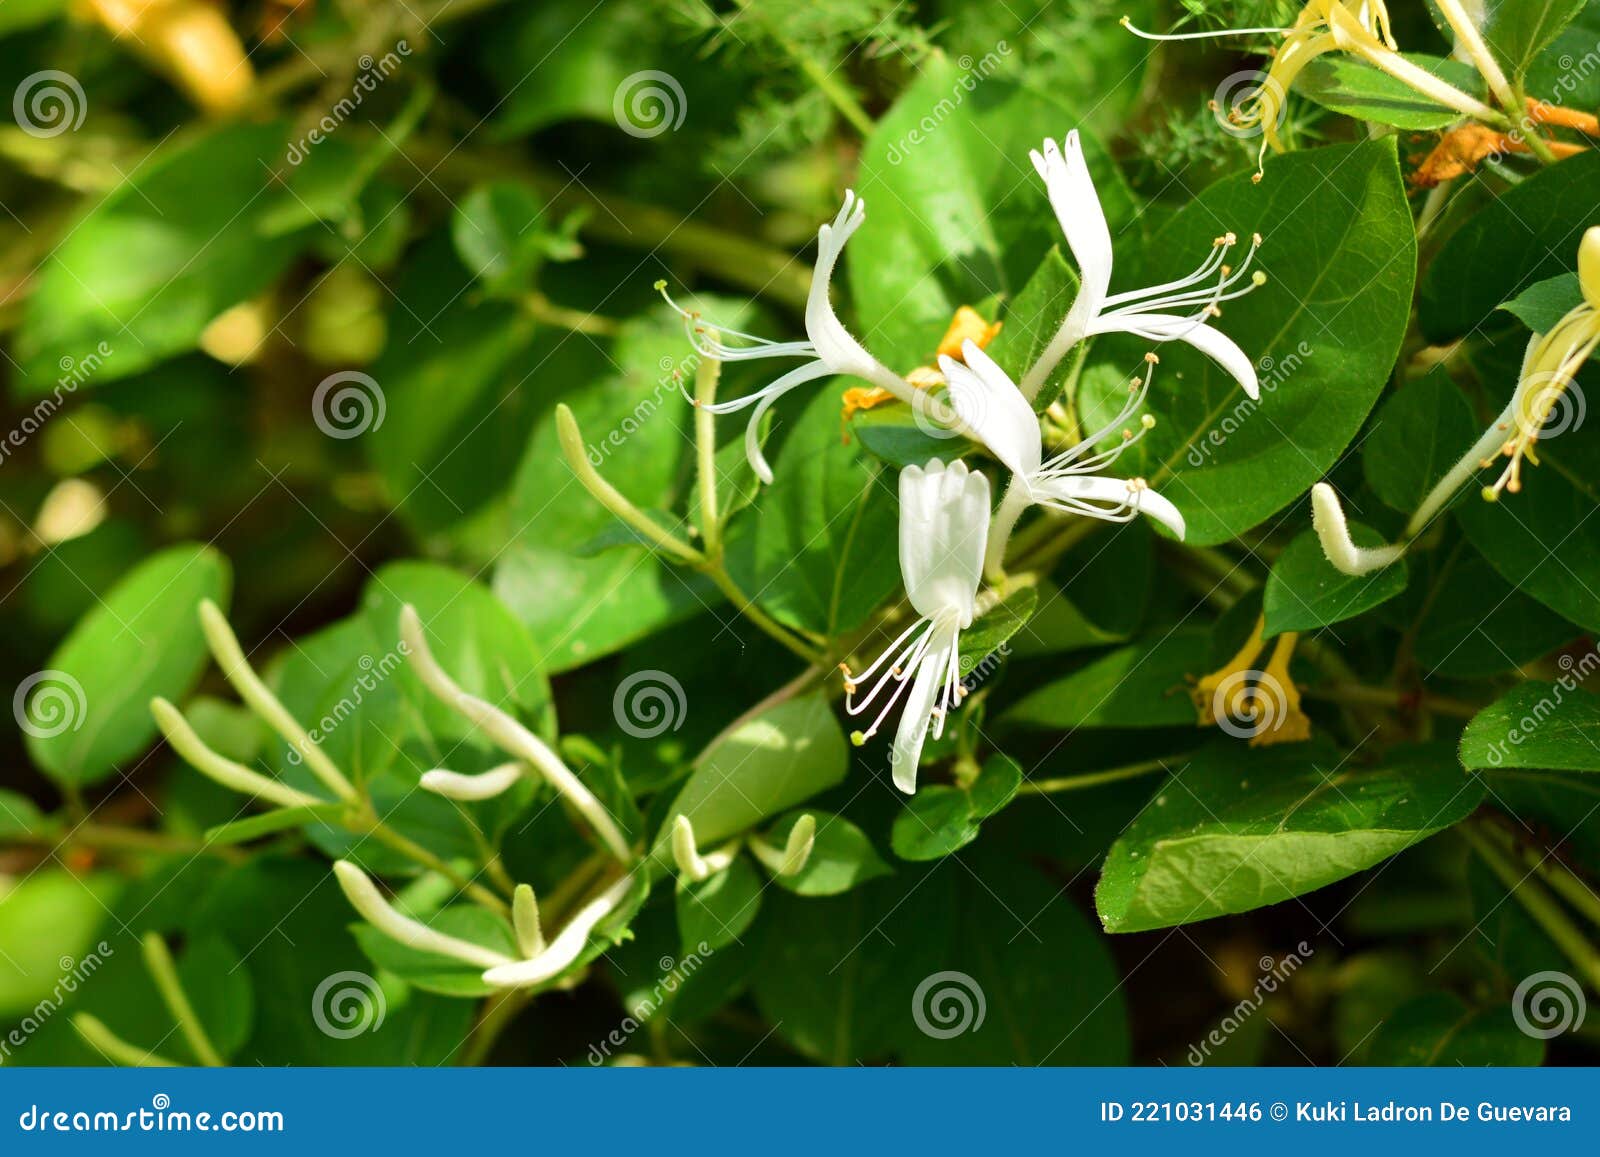 honeysuckle plant with white flowers